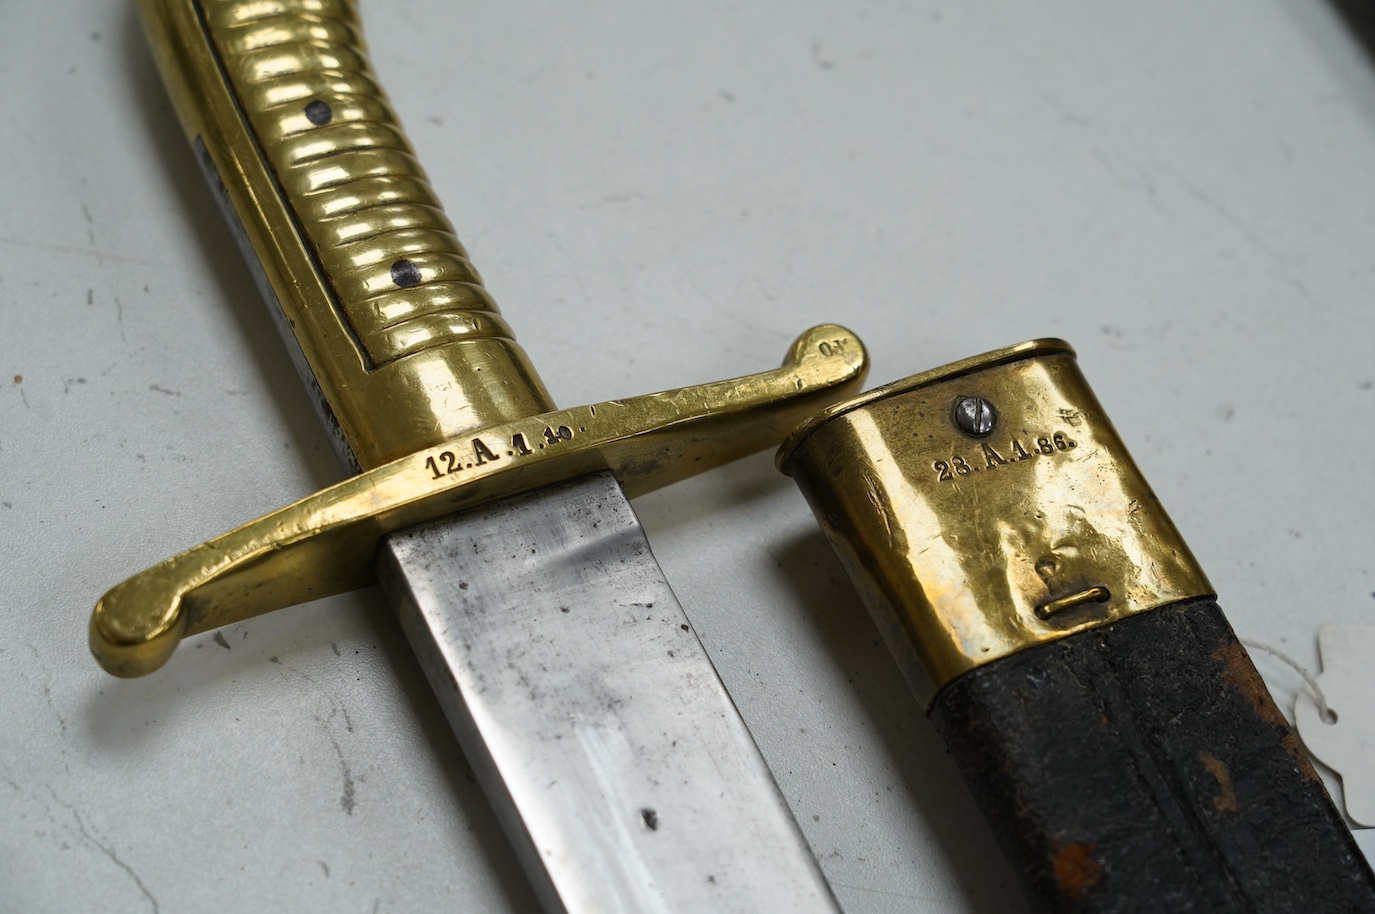 An 1855 Prussian infantry pioneer’s short sword, brass hilt stamped 12.A.1.10 in its brass mounted leather scabbard, blade 47.5cm. Condition - fair, some age wear